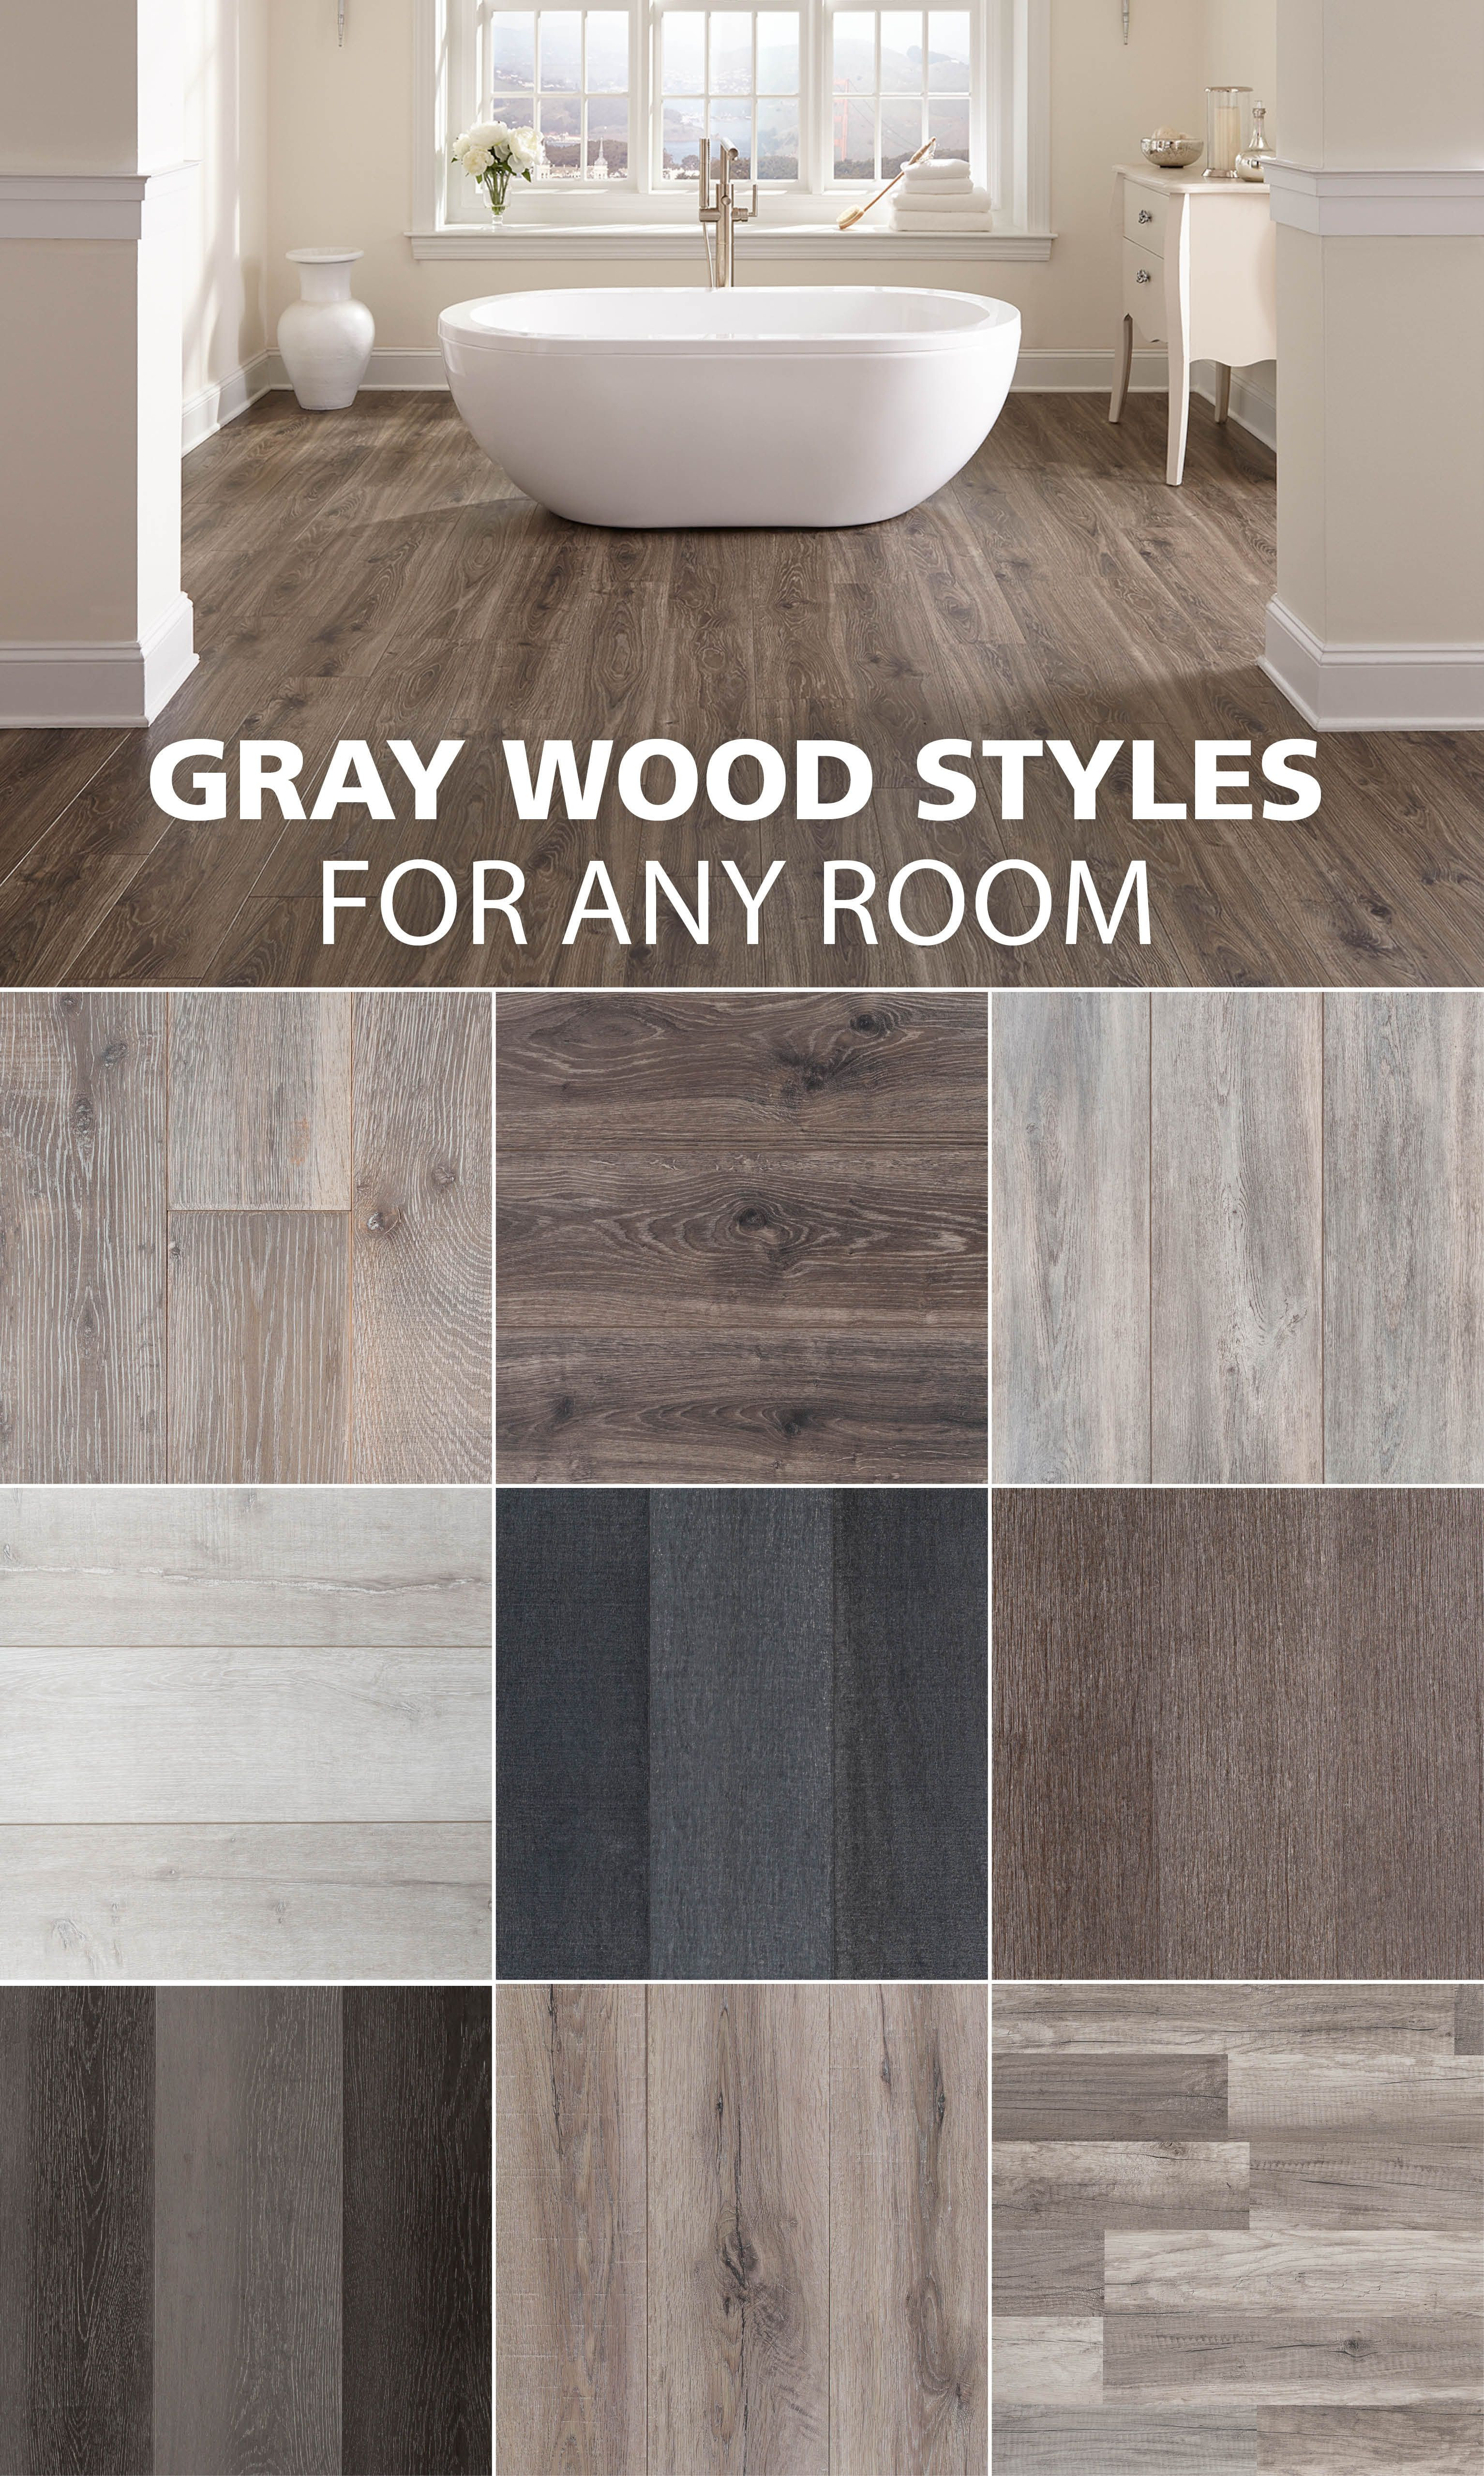 Hardwood Floor Finishes Colors Of Here are some Of Our Favorite Gray Wood Look Styles Home Decor with Regard to Here are some Of Our Favorite Gray Wood Look Styles Gray Hardwood Floors Light